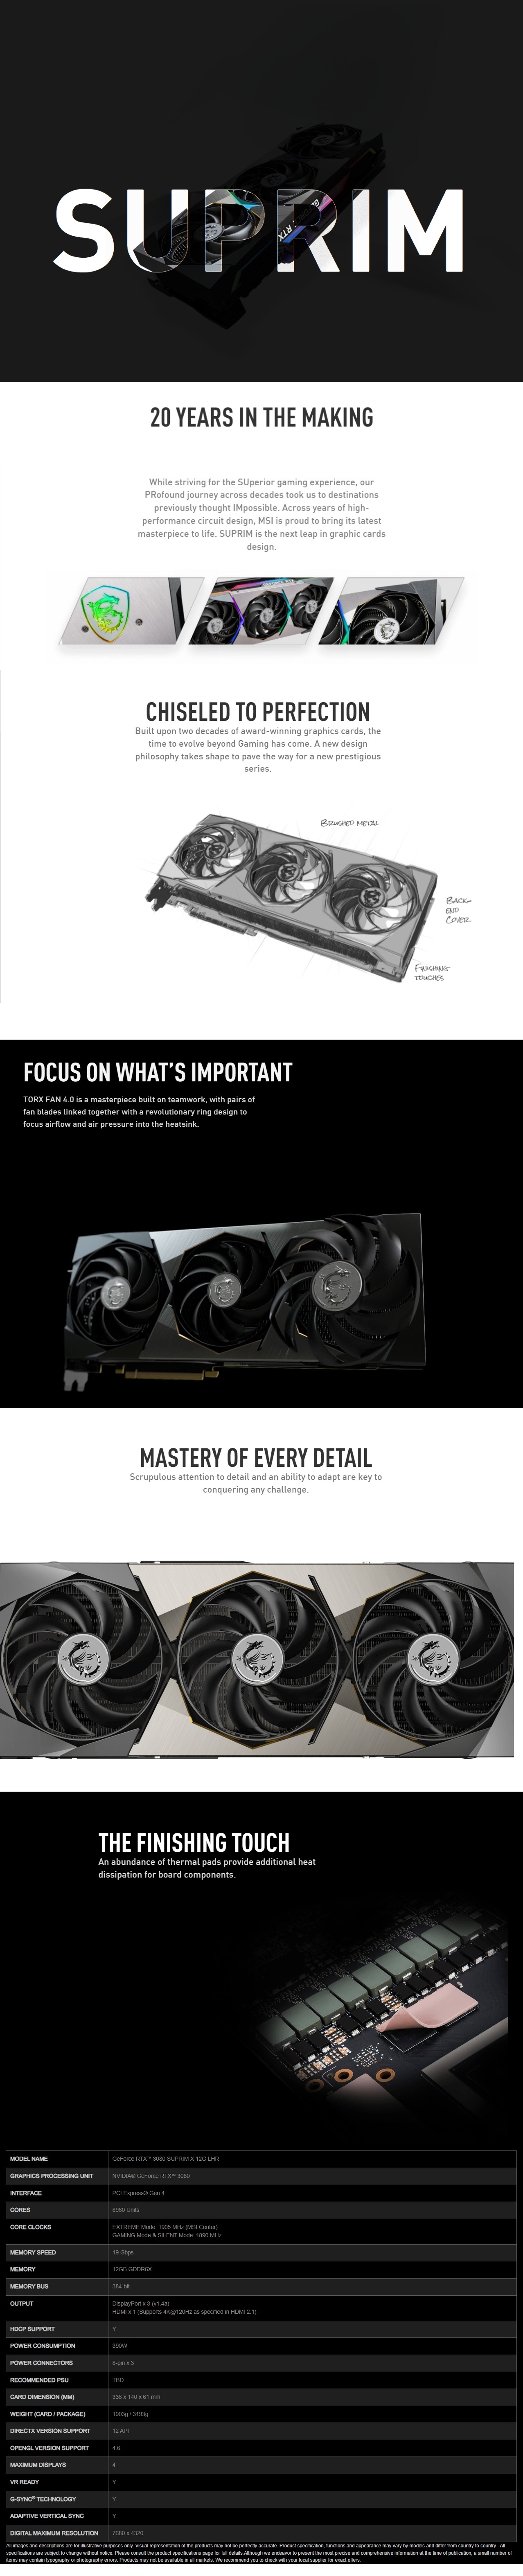 A large marketing image providing additional information about the product MSI GeForce RTX 3080 SUPRIM X LHR 12GB GDDR6X - Additional alt info not provided